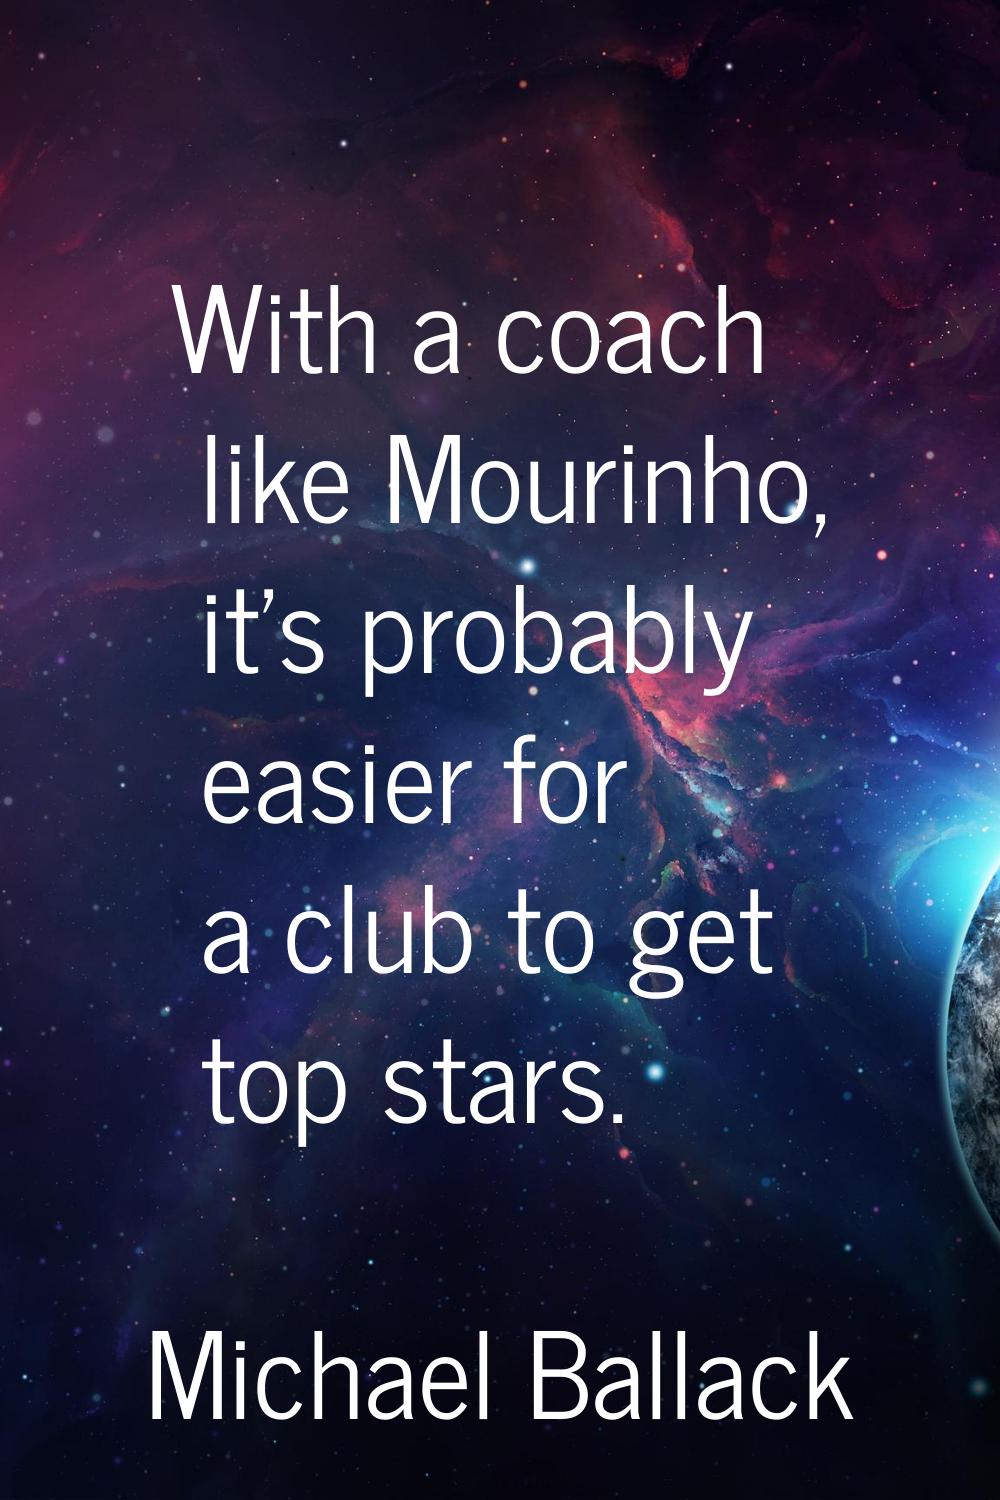 With a coach like Mourinho, it's probably easier for a club to get top stars.